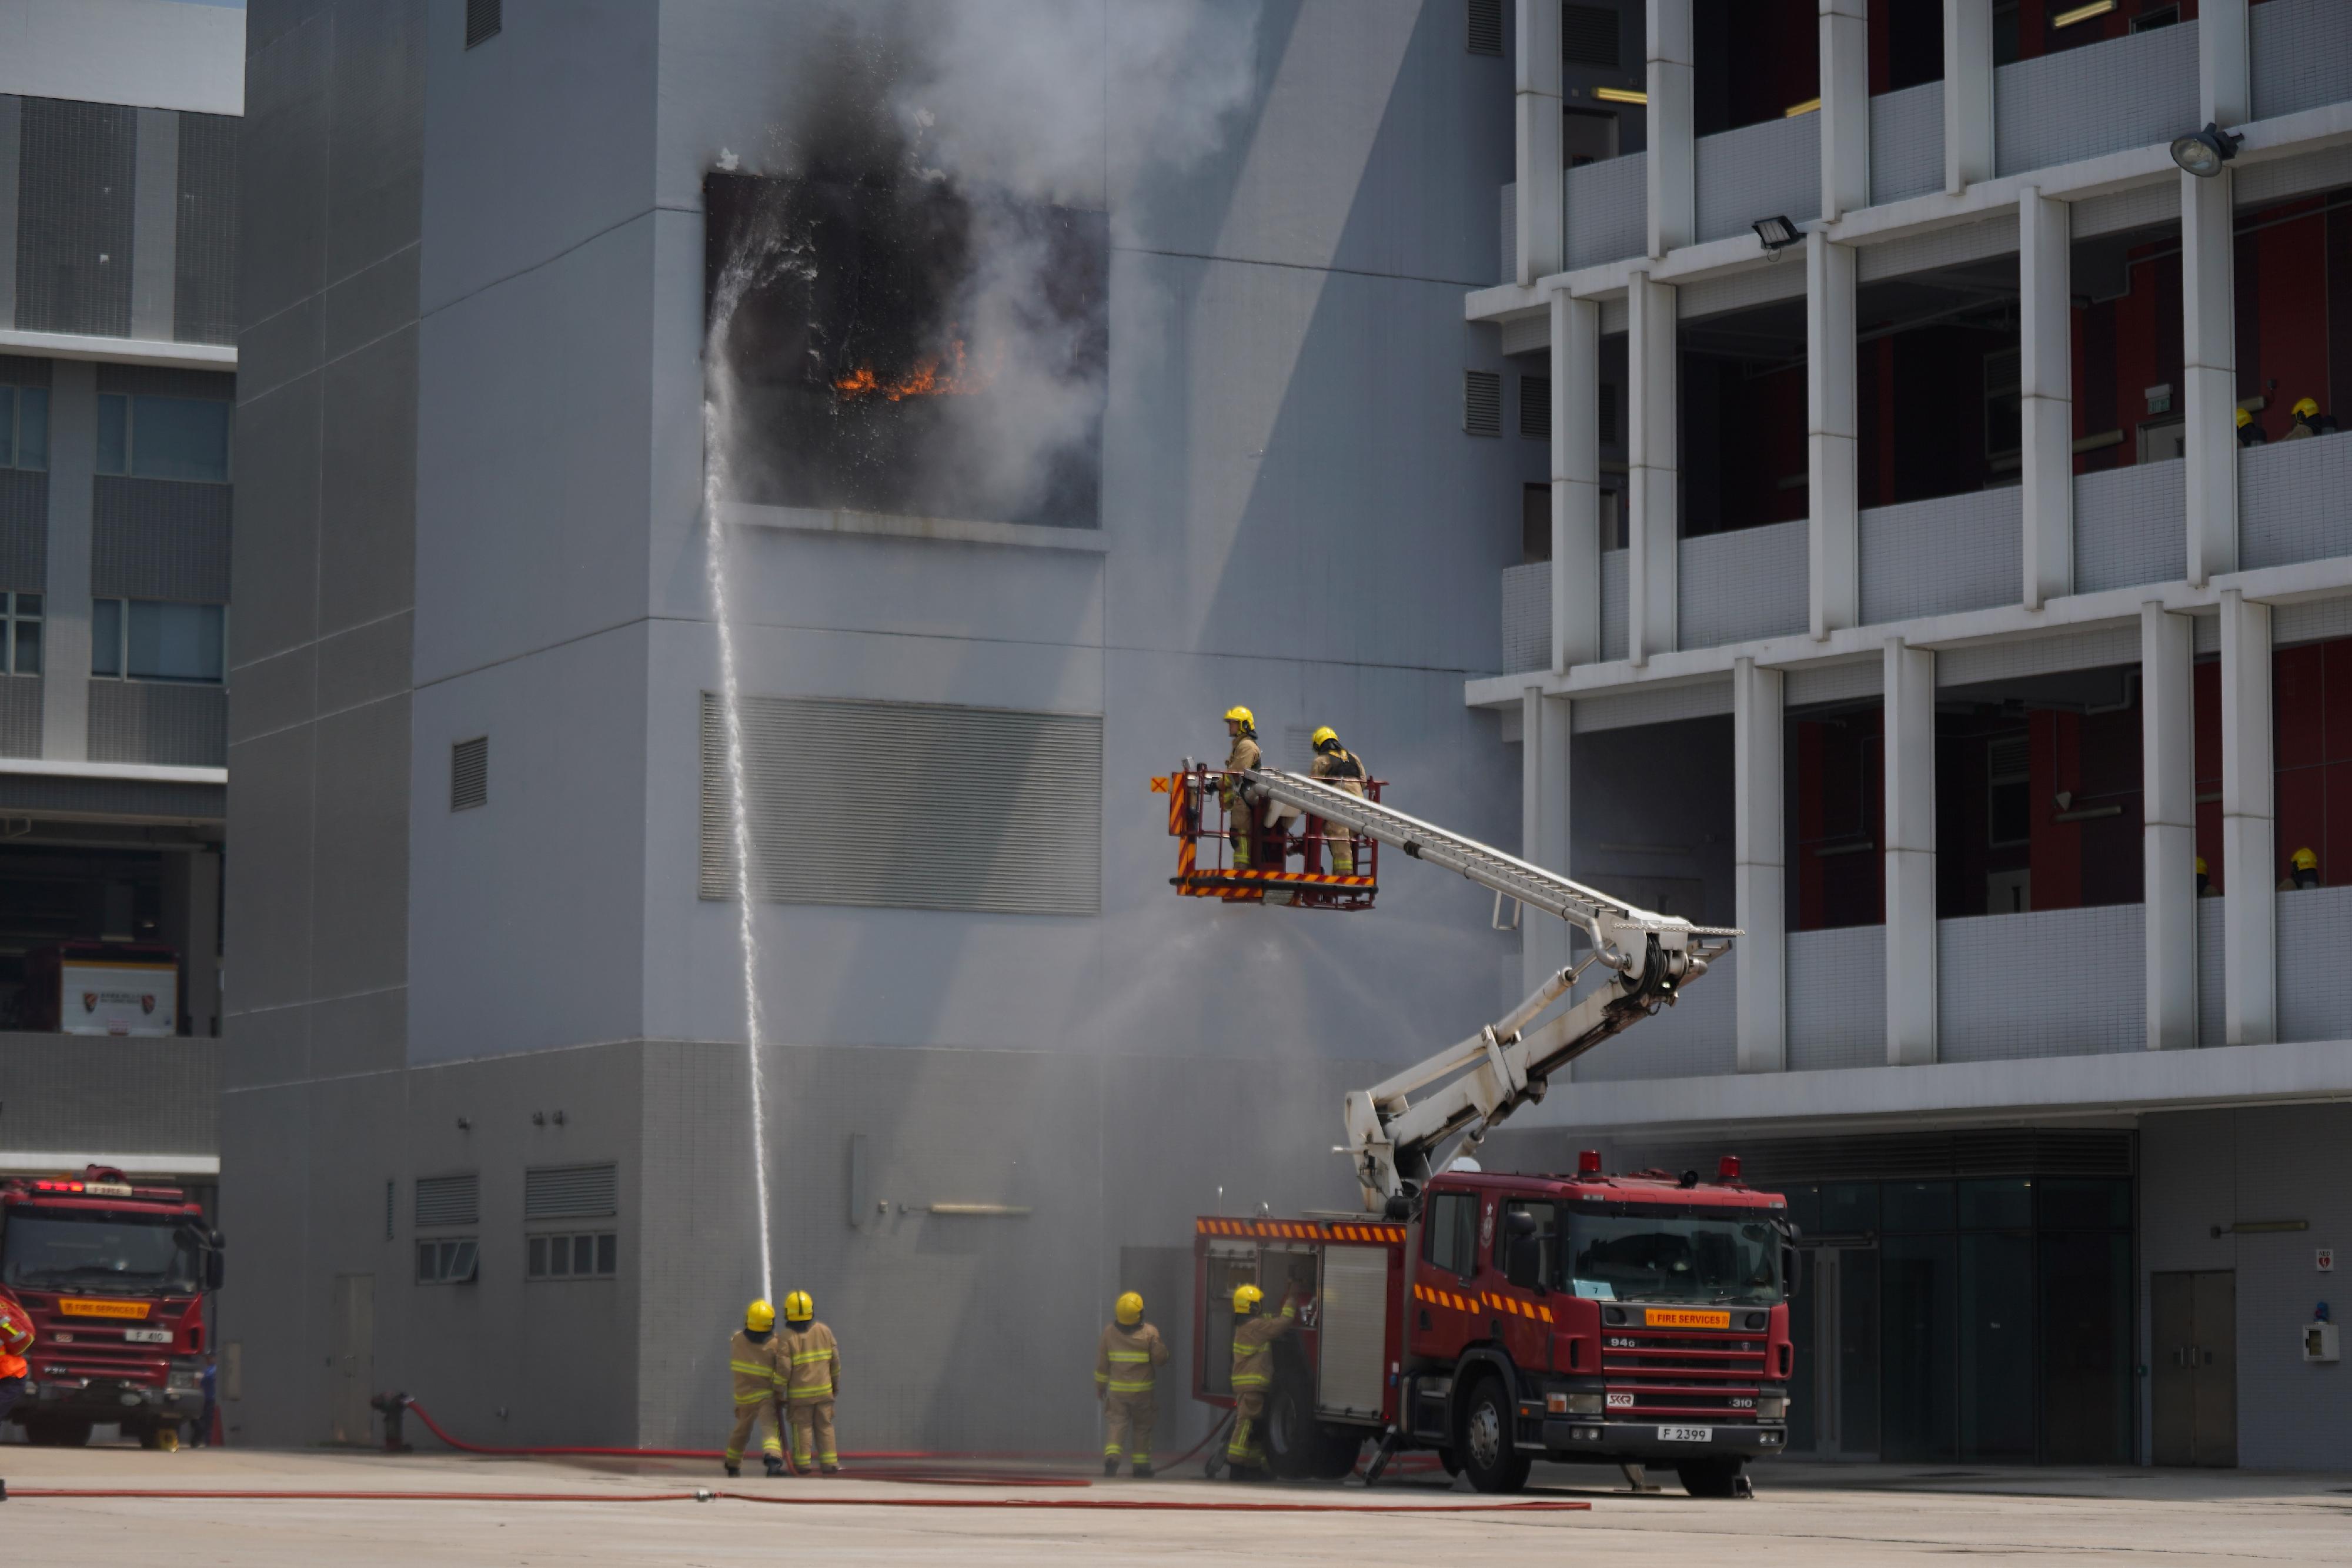 The Fire Services Department held an open day at the Fire and Ambulance Services Academy today (April 15) to introduce training facilities in the Academy. Various demonstrations, experiences and performances were arranged for the public. Photo shows fire personnel performing firefighting demonstration.